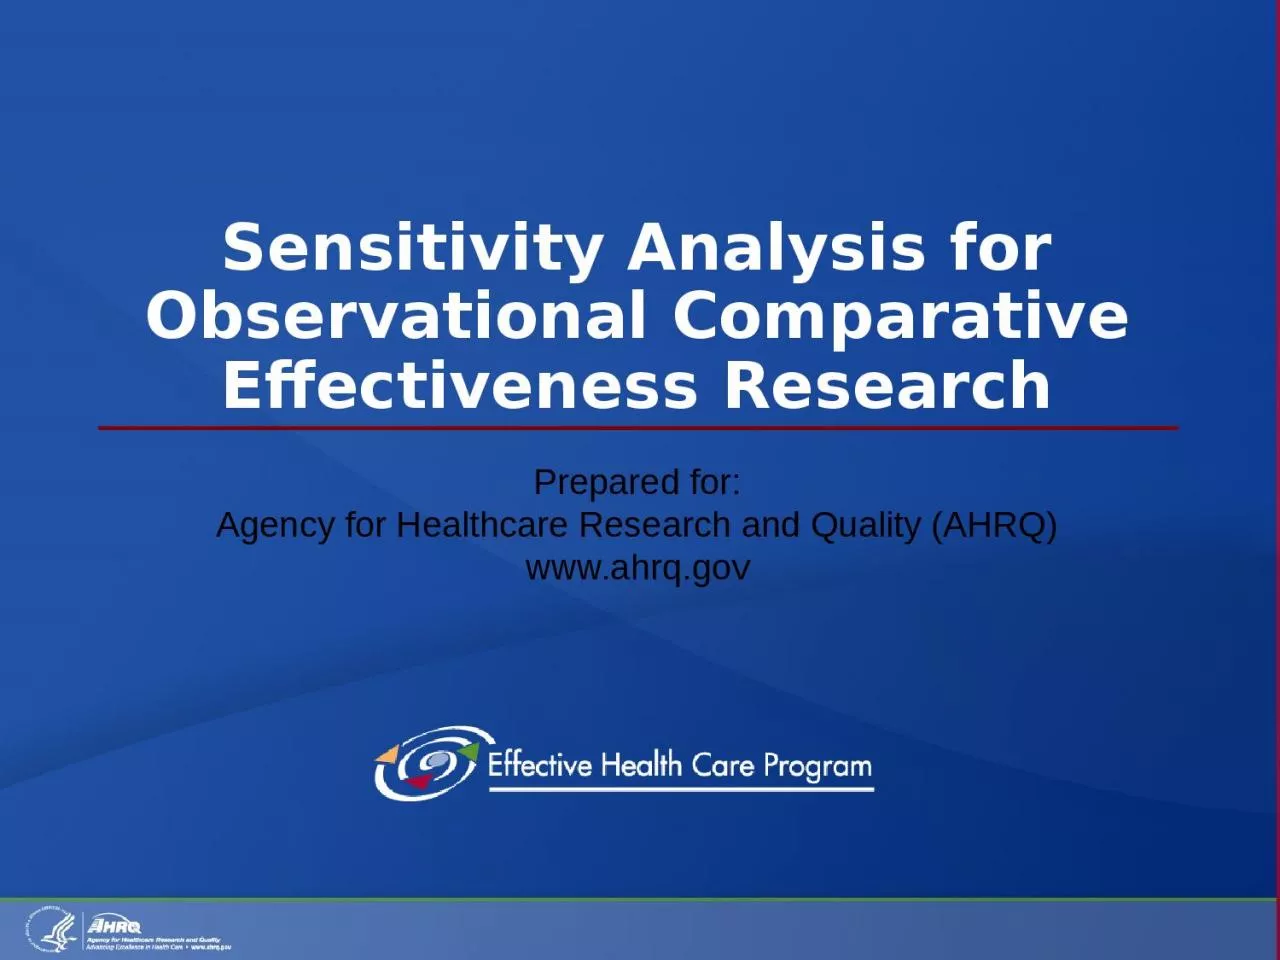 Sensitivity Analysis for Observational Comparative Effectiveness Research